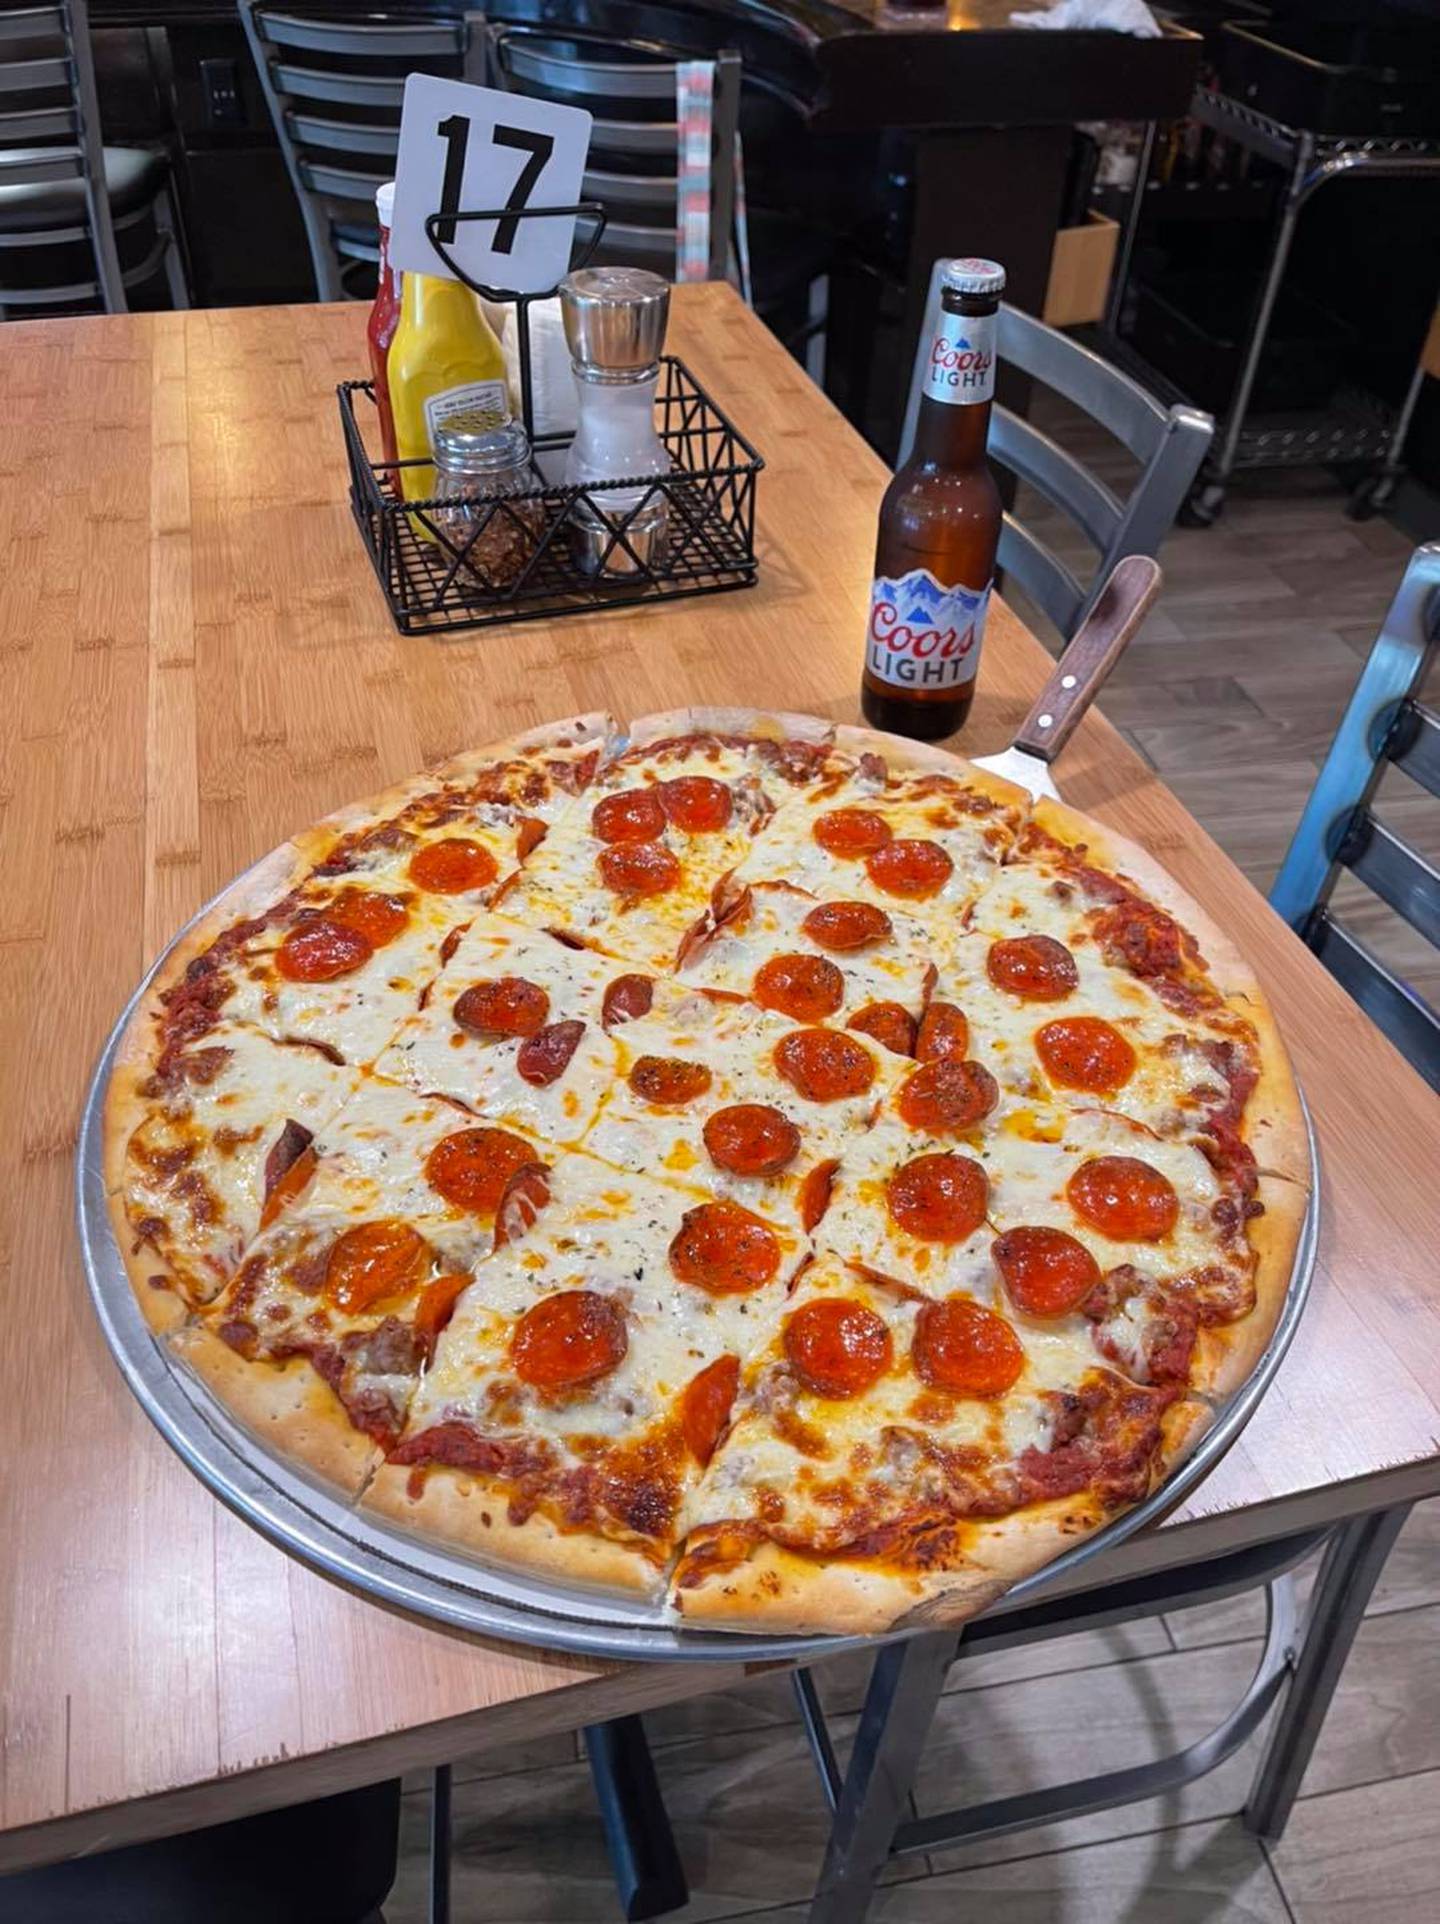 Smoking Grill and Pizzeria was named one of the finest pizza places in DeKalb County by our readers in 2021. (Photo from Smoking Grill and Pizzeria Facebook page)